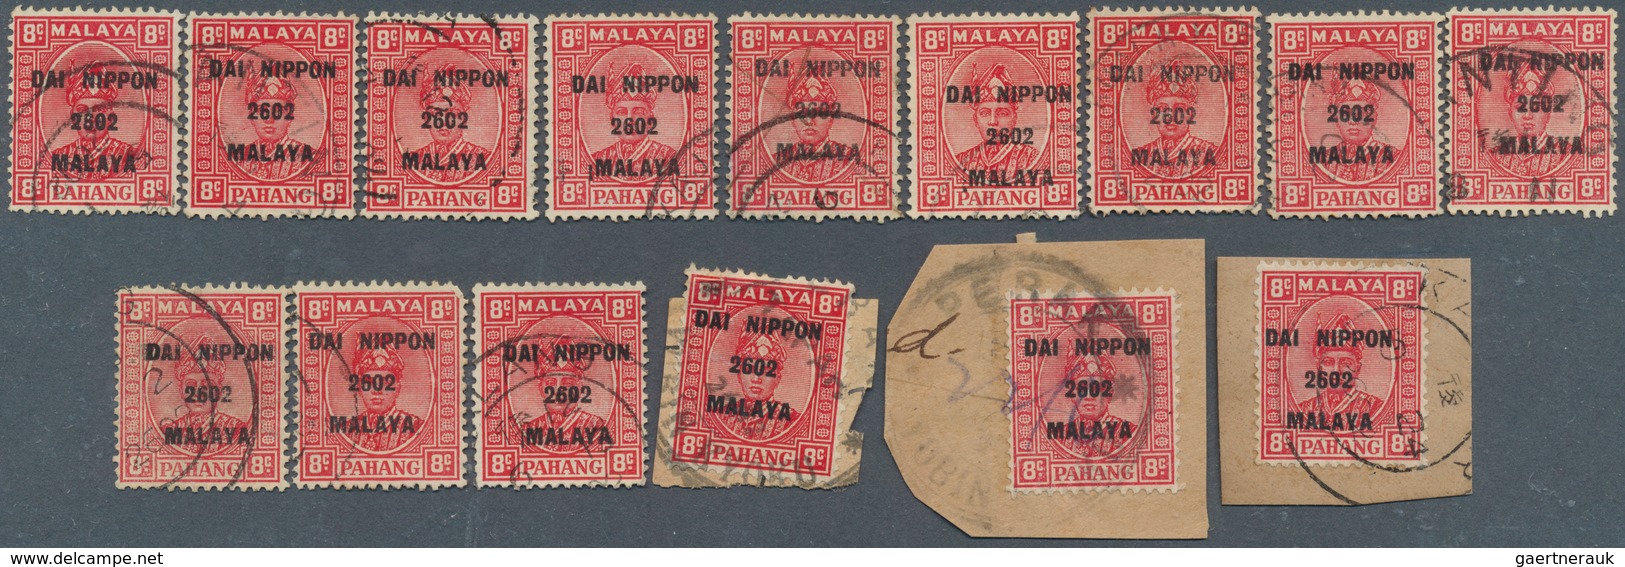 Japanische Besetzung  WK II - Malaya: General issues, Pahang, 1942, ovpts. T16 resp. T2 mint and use